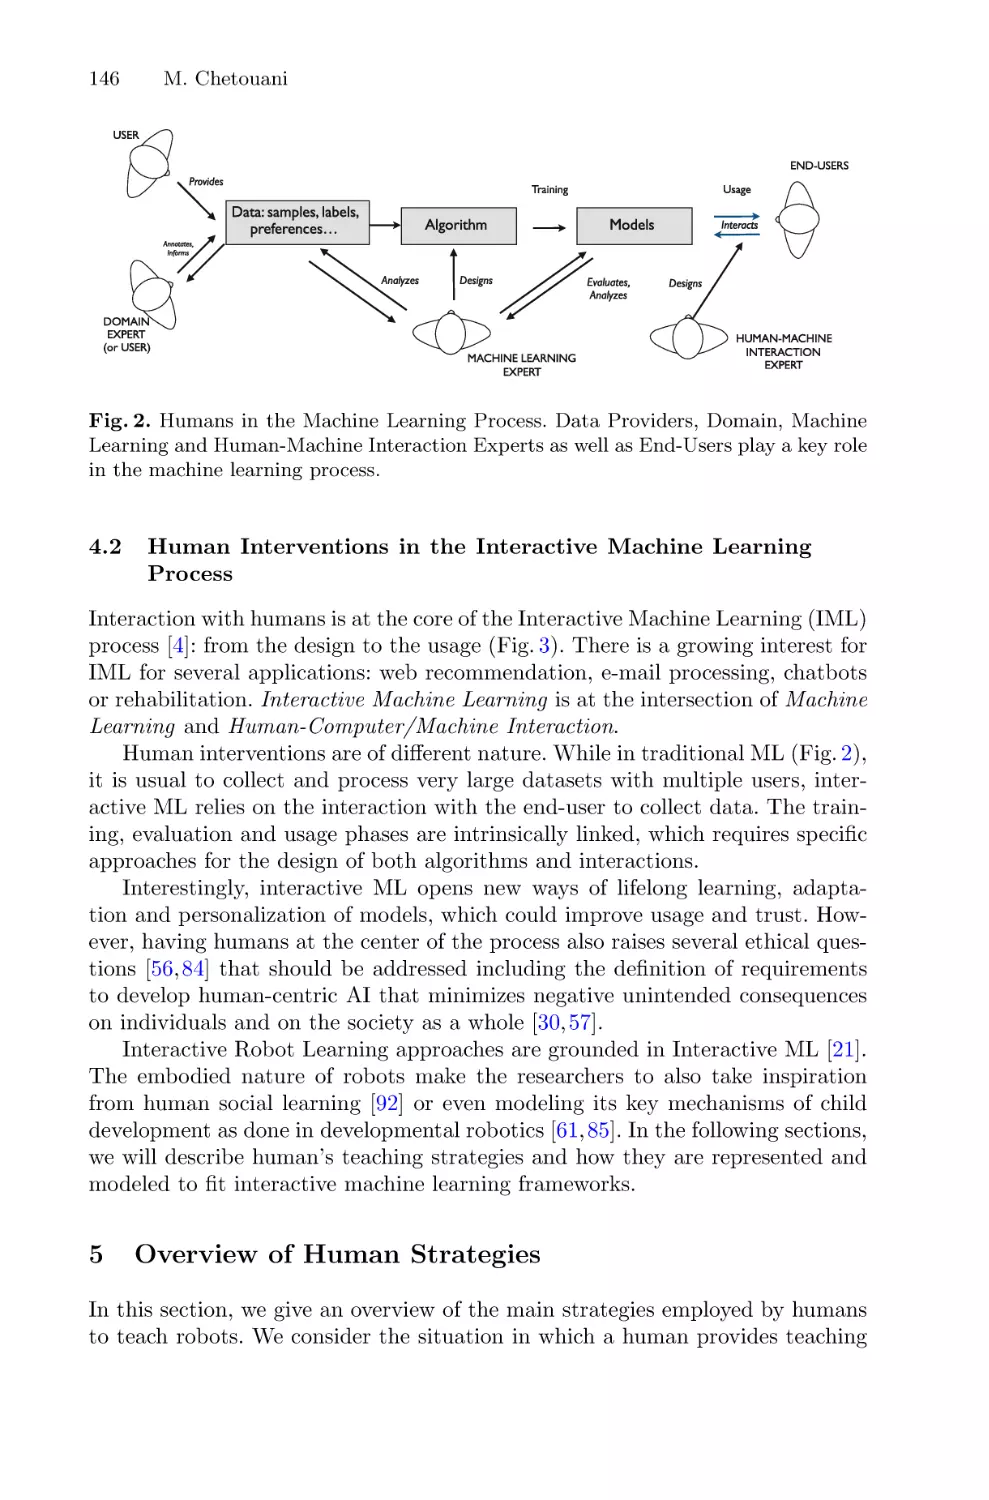 4.2 Human Interventions in the Interactive Machine Learning Process
5 Overview of Human Strategies